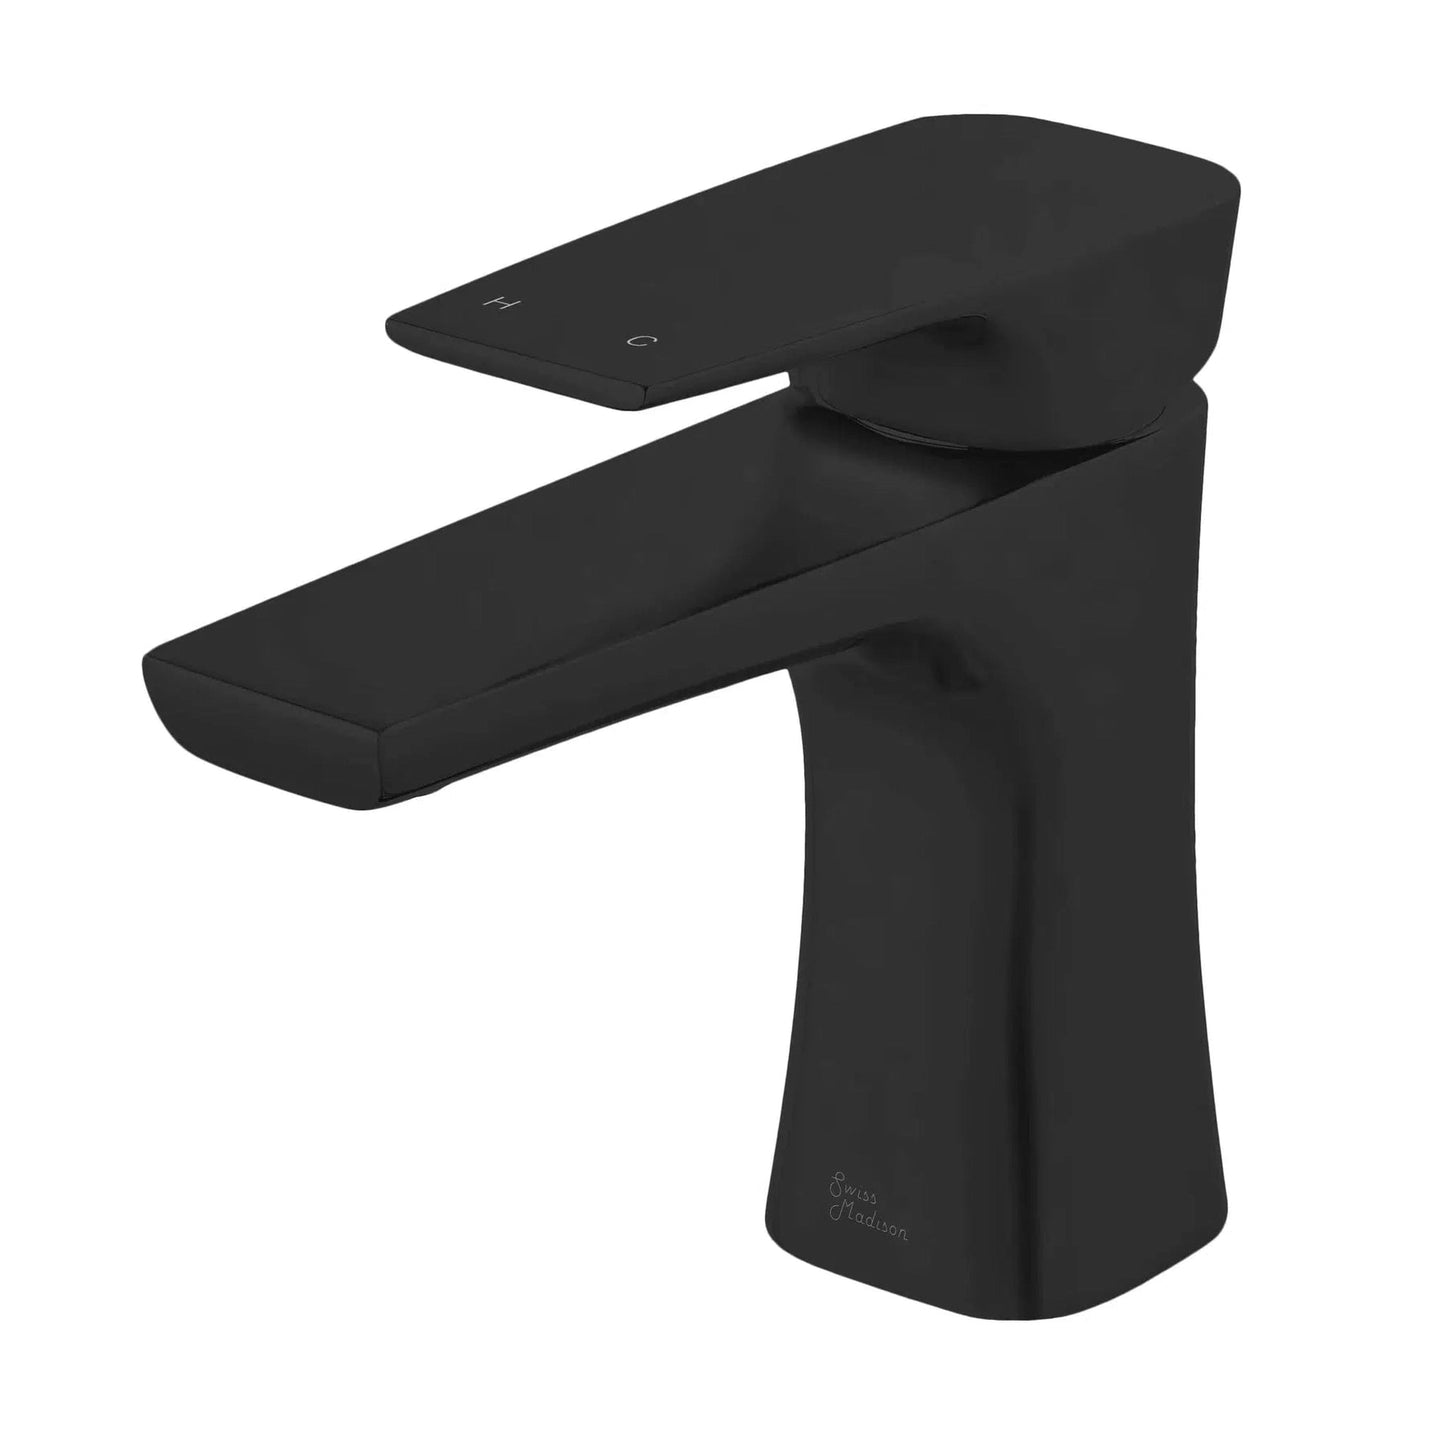 Swiss Madison Monaco 6" Matte Black Single Hole Bathroom Faucet With Flow Rate of 1.2 GPM